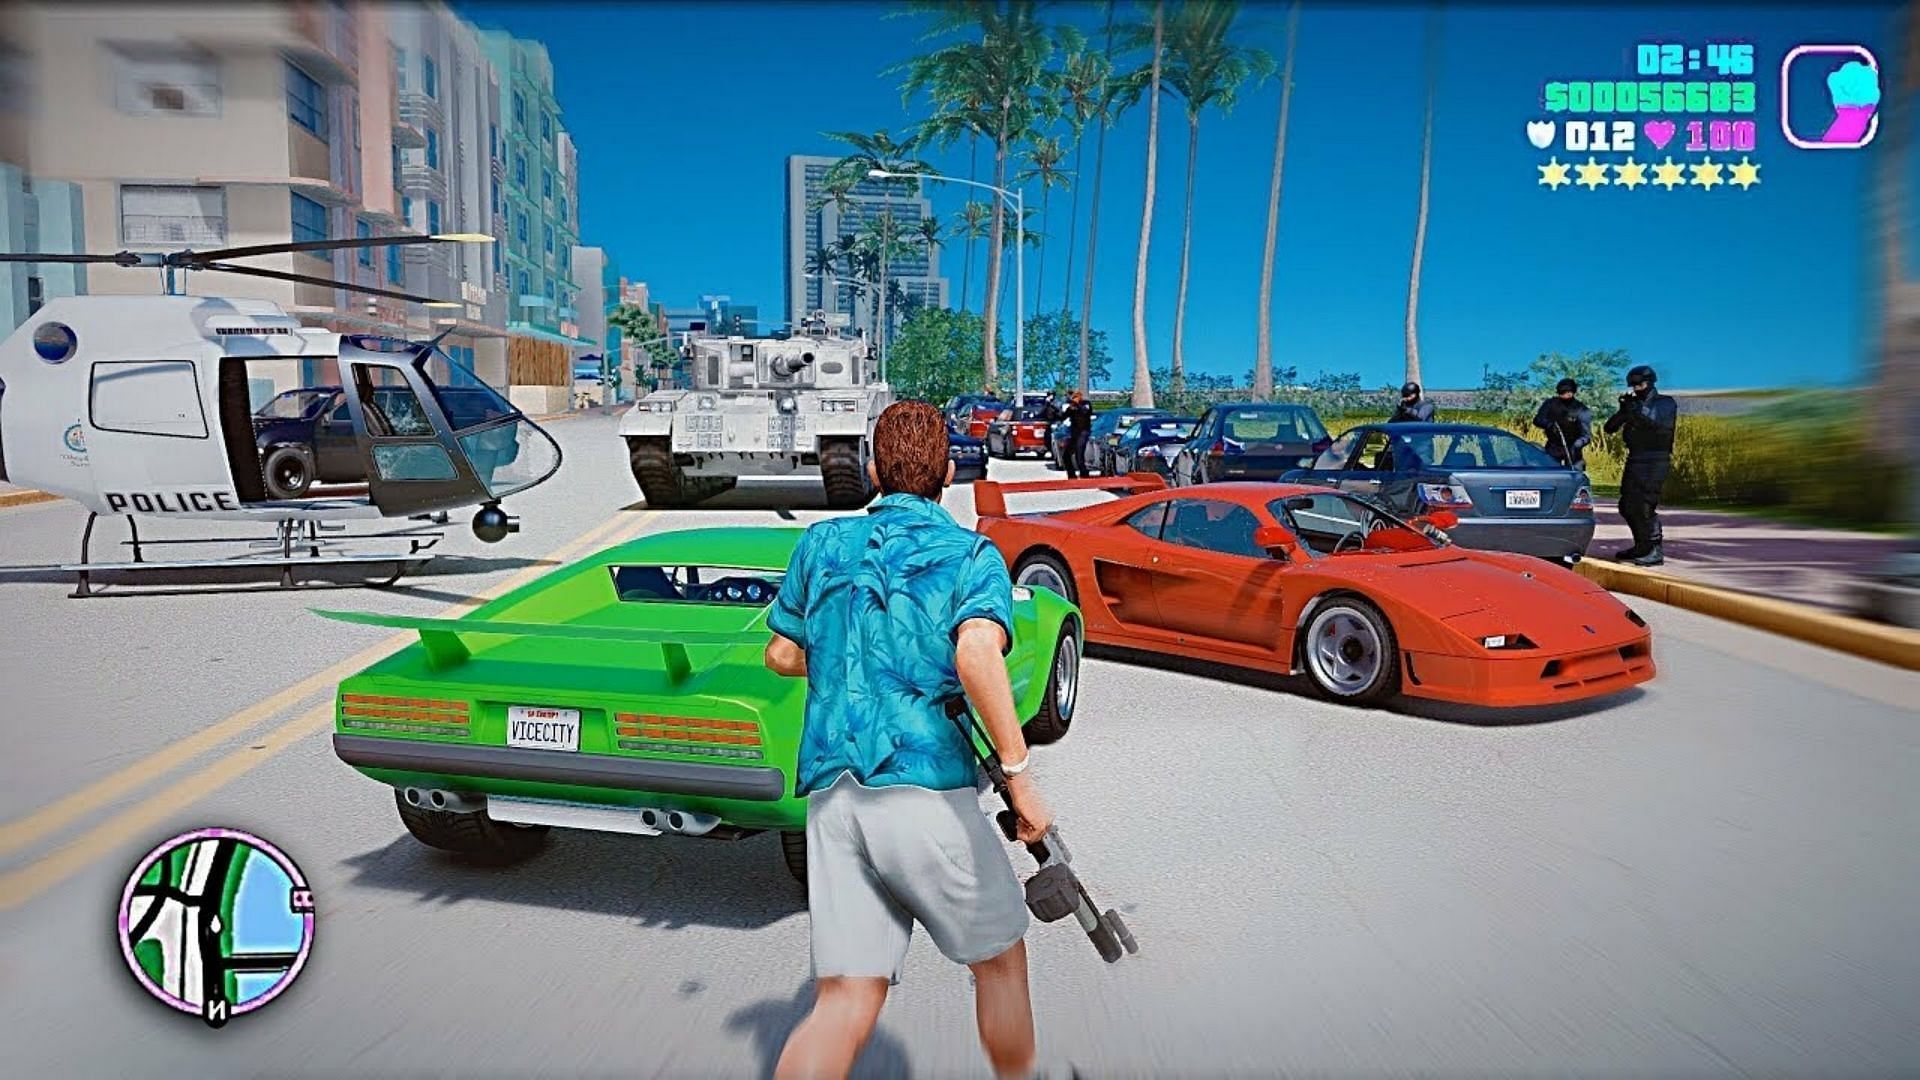 5 GTA Vice City characters that fans are excited to see in GTA Trilogy